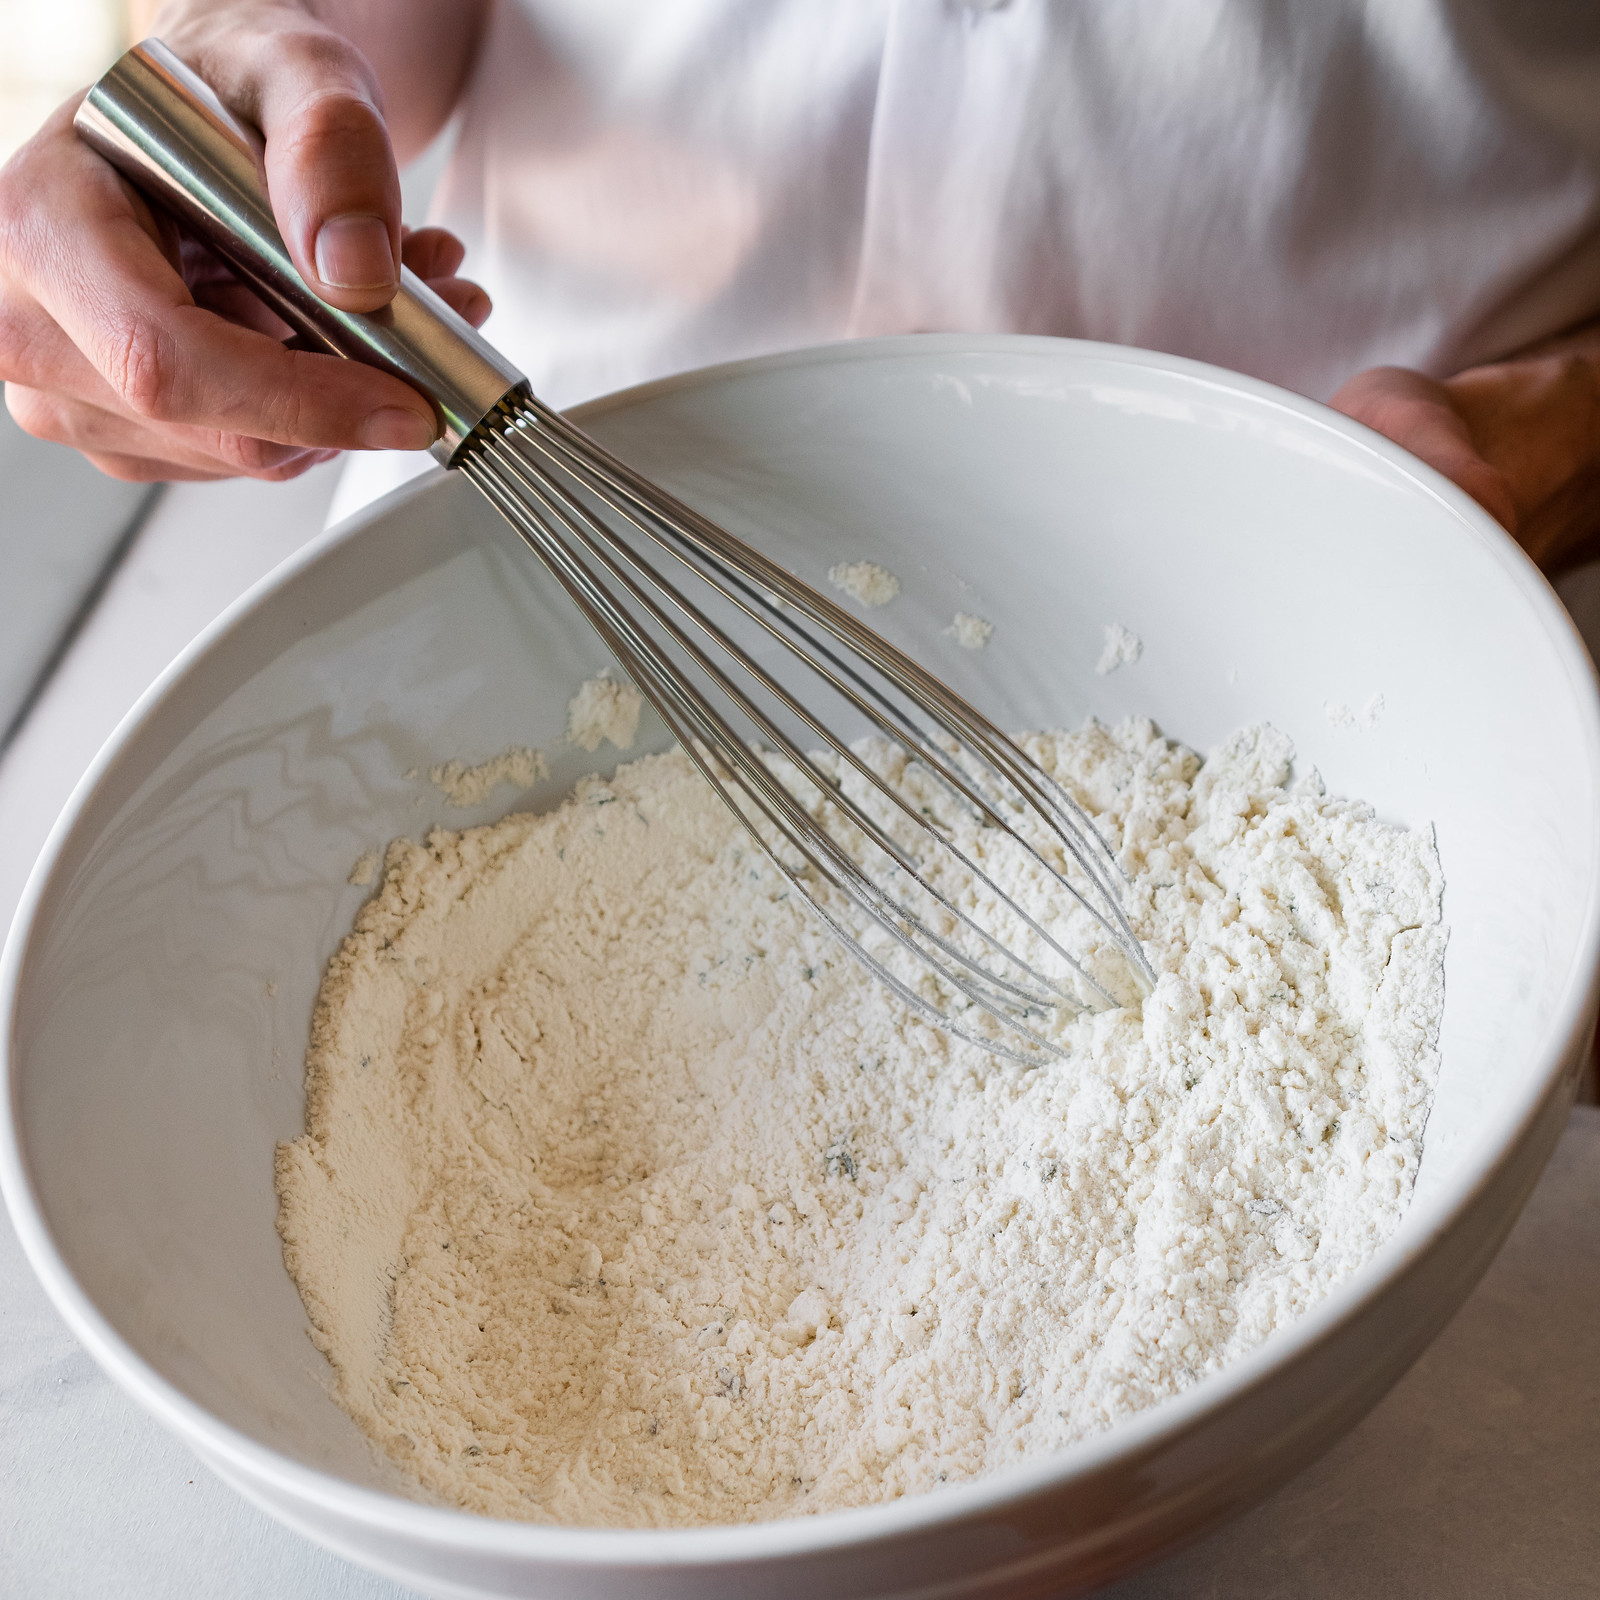 whisking the dry ingredients together